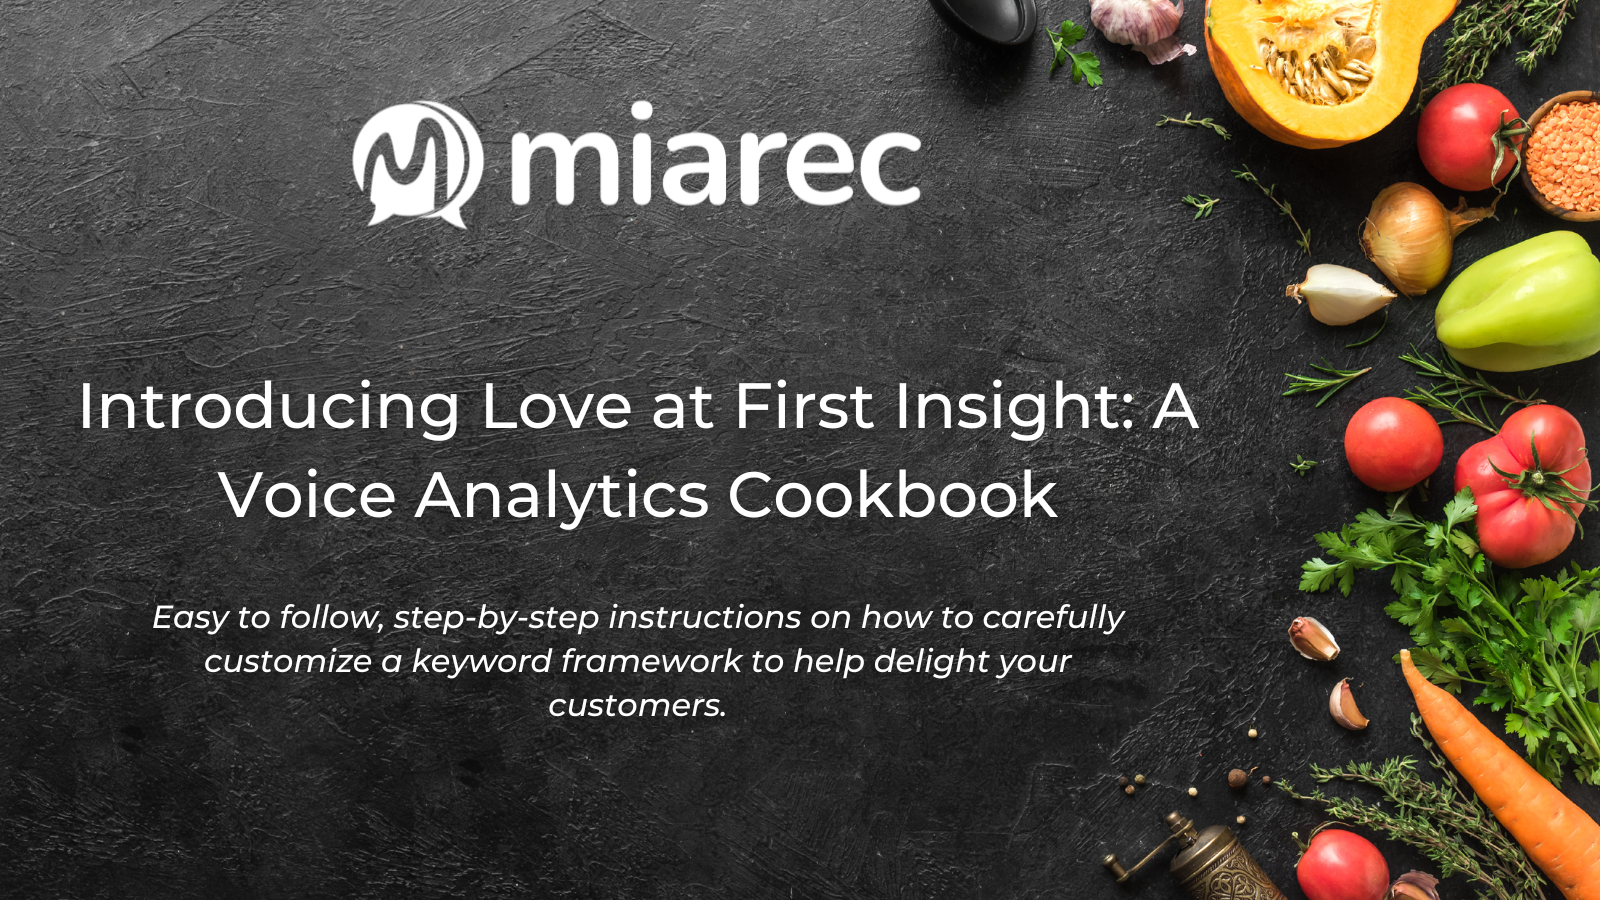 Introducing Love at First Insight A Voice Analytics Cookbook (1)